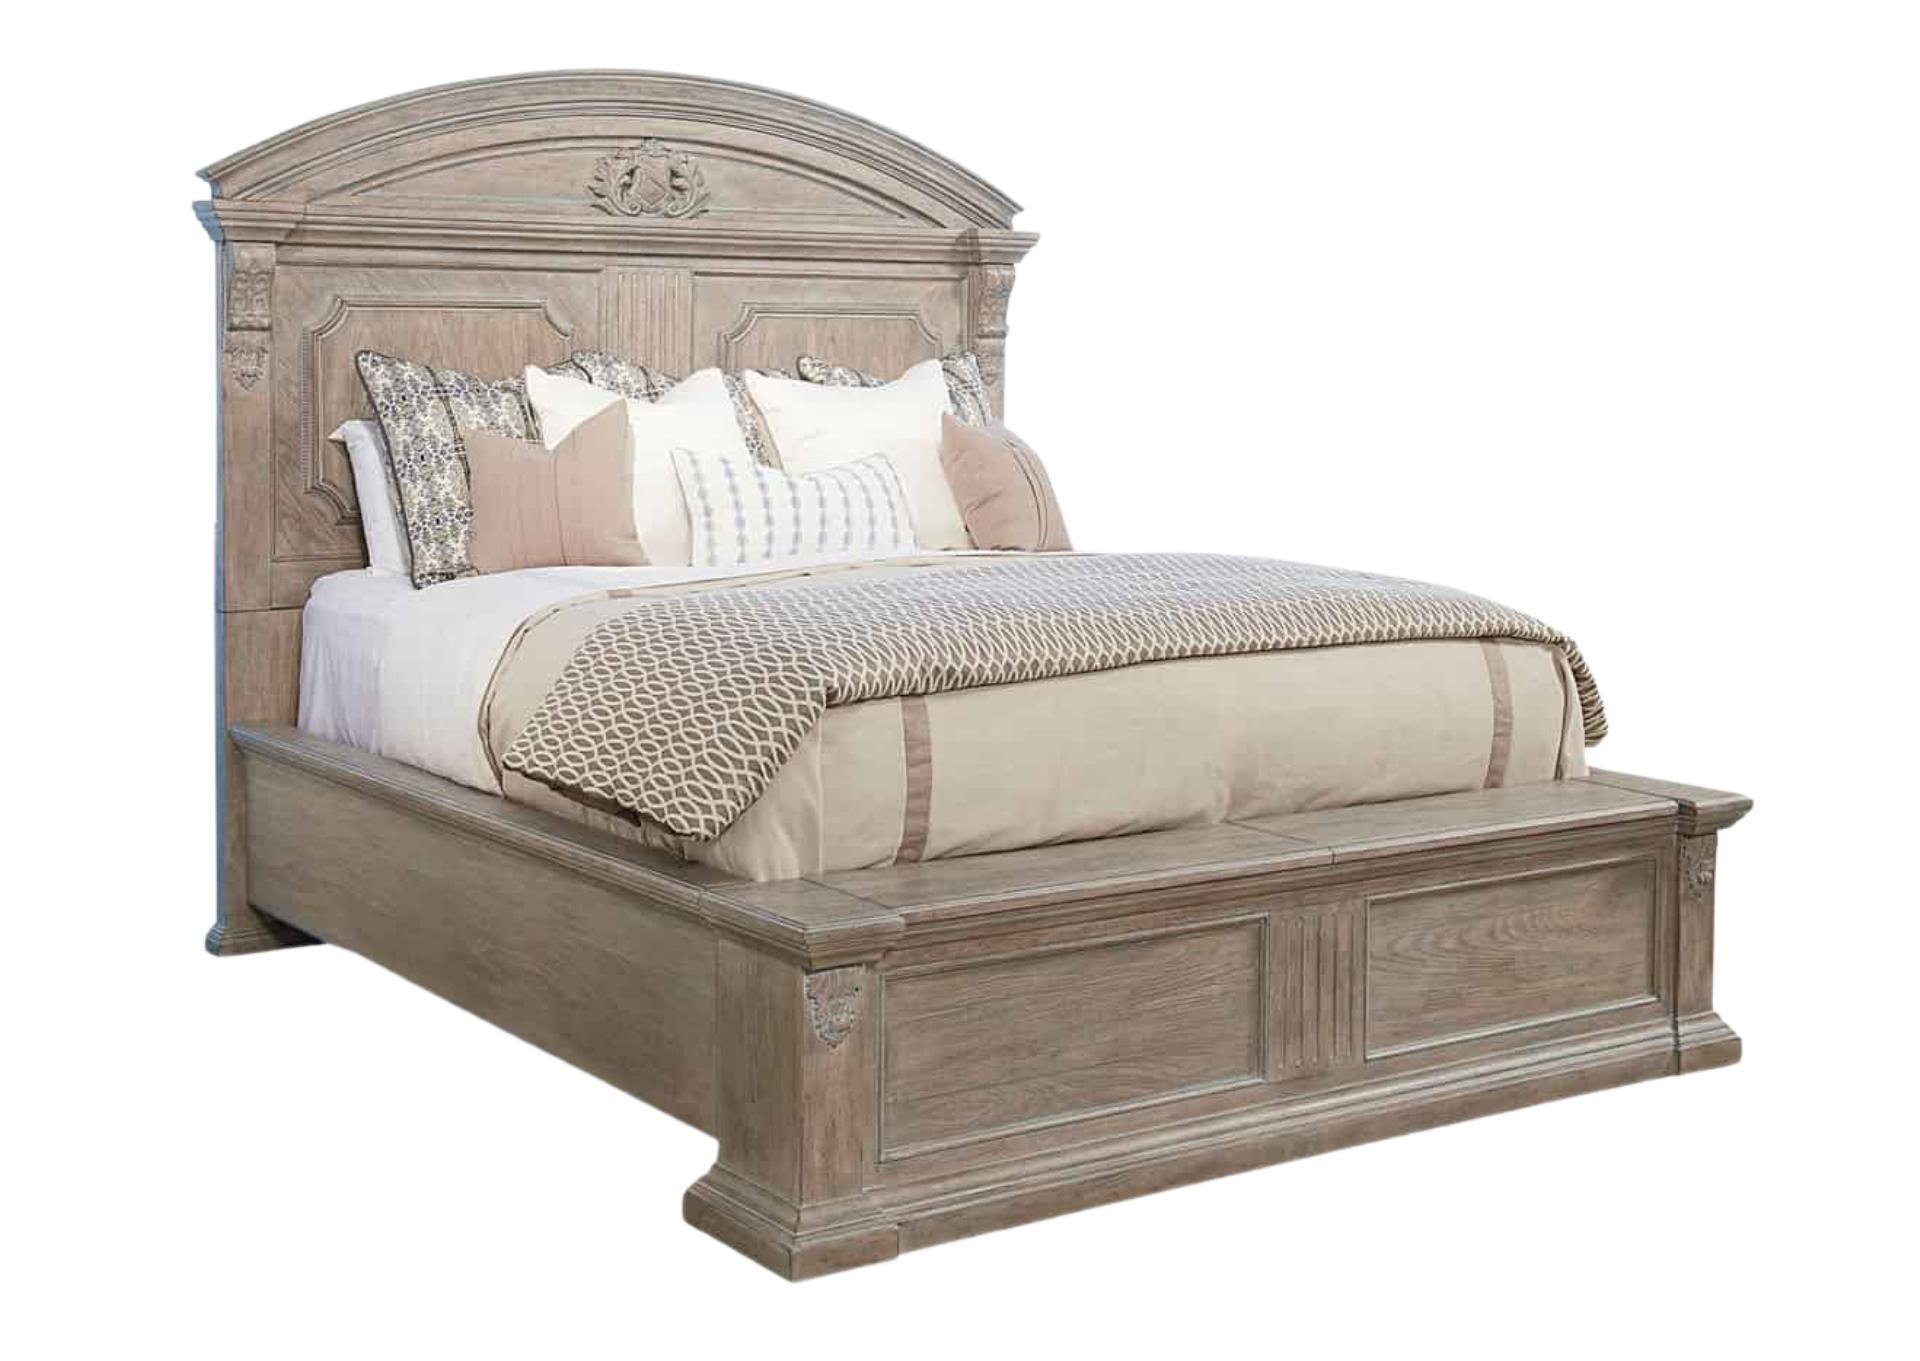 ARCH SALVAGE CHAMBERS QUEEN BED